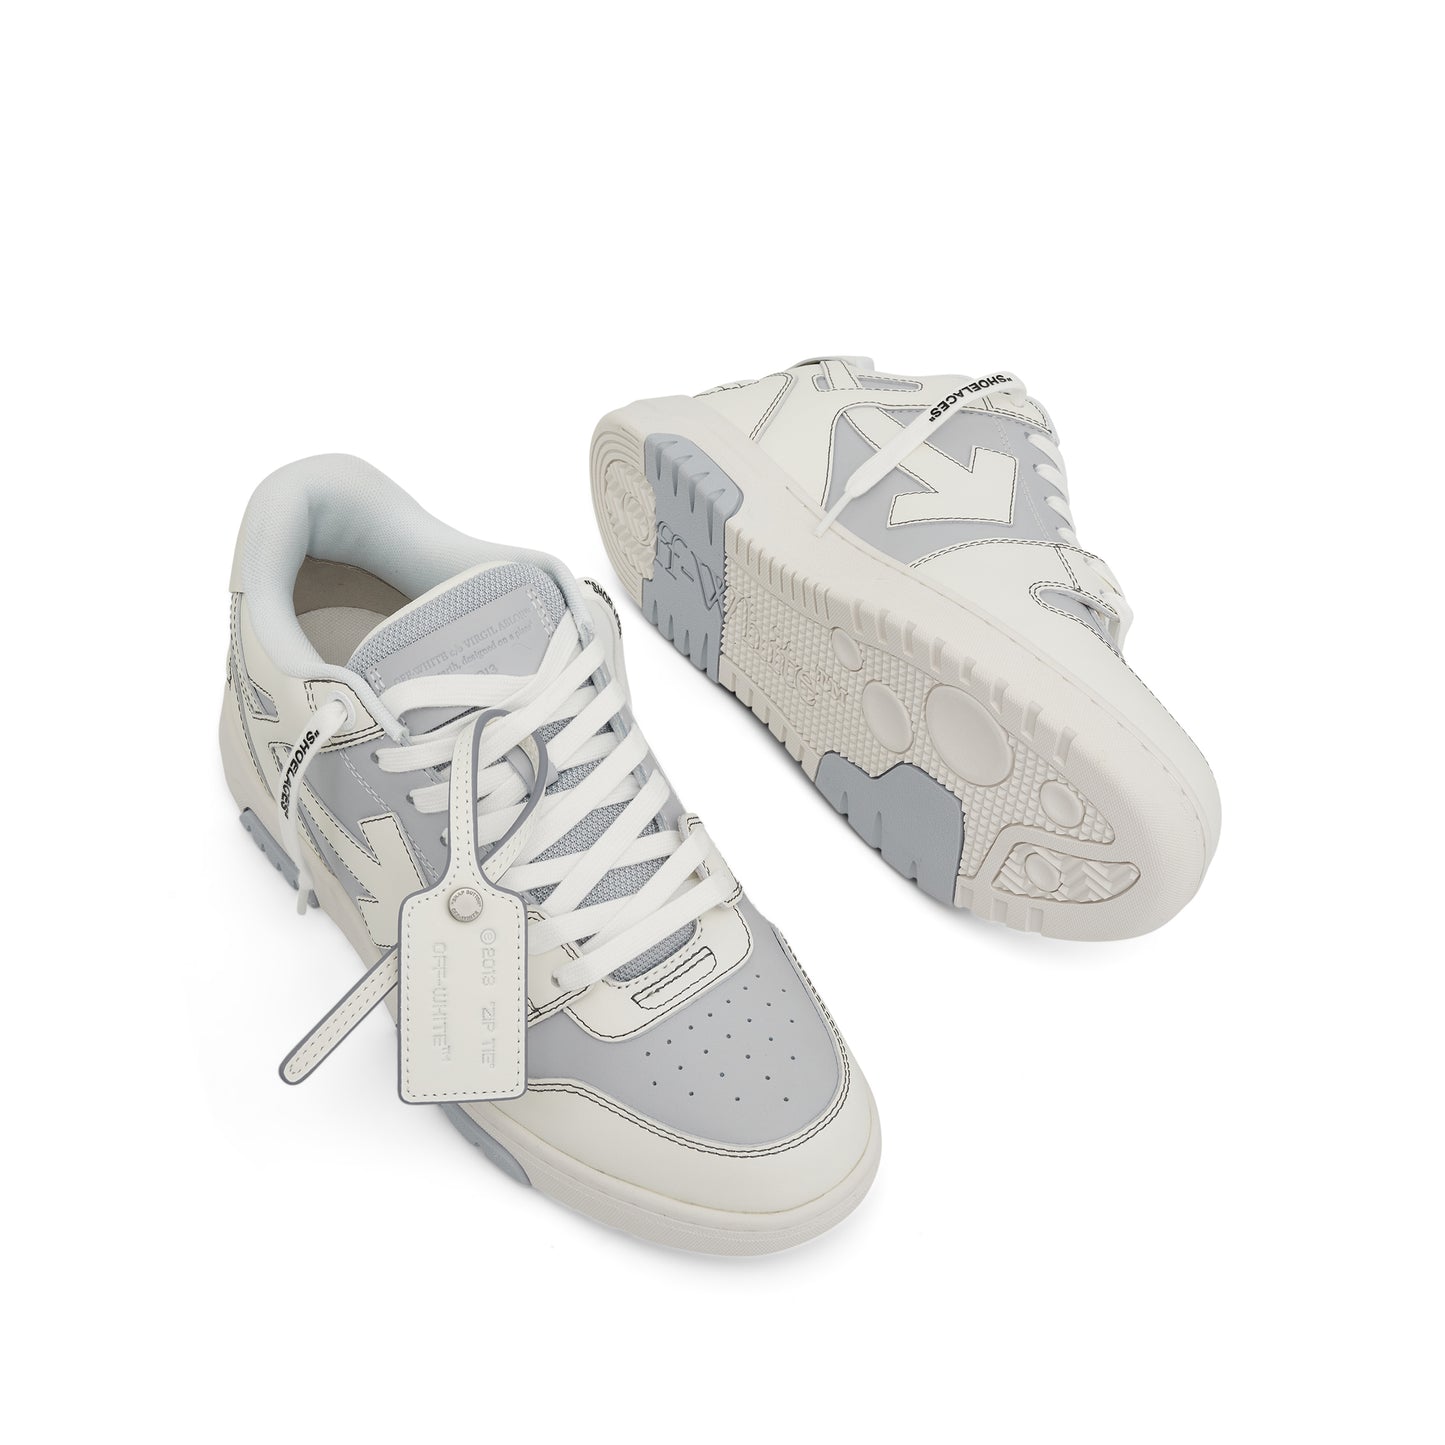 Out of Office Calf Leather Sneaker in Light Blue/White